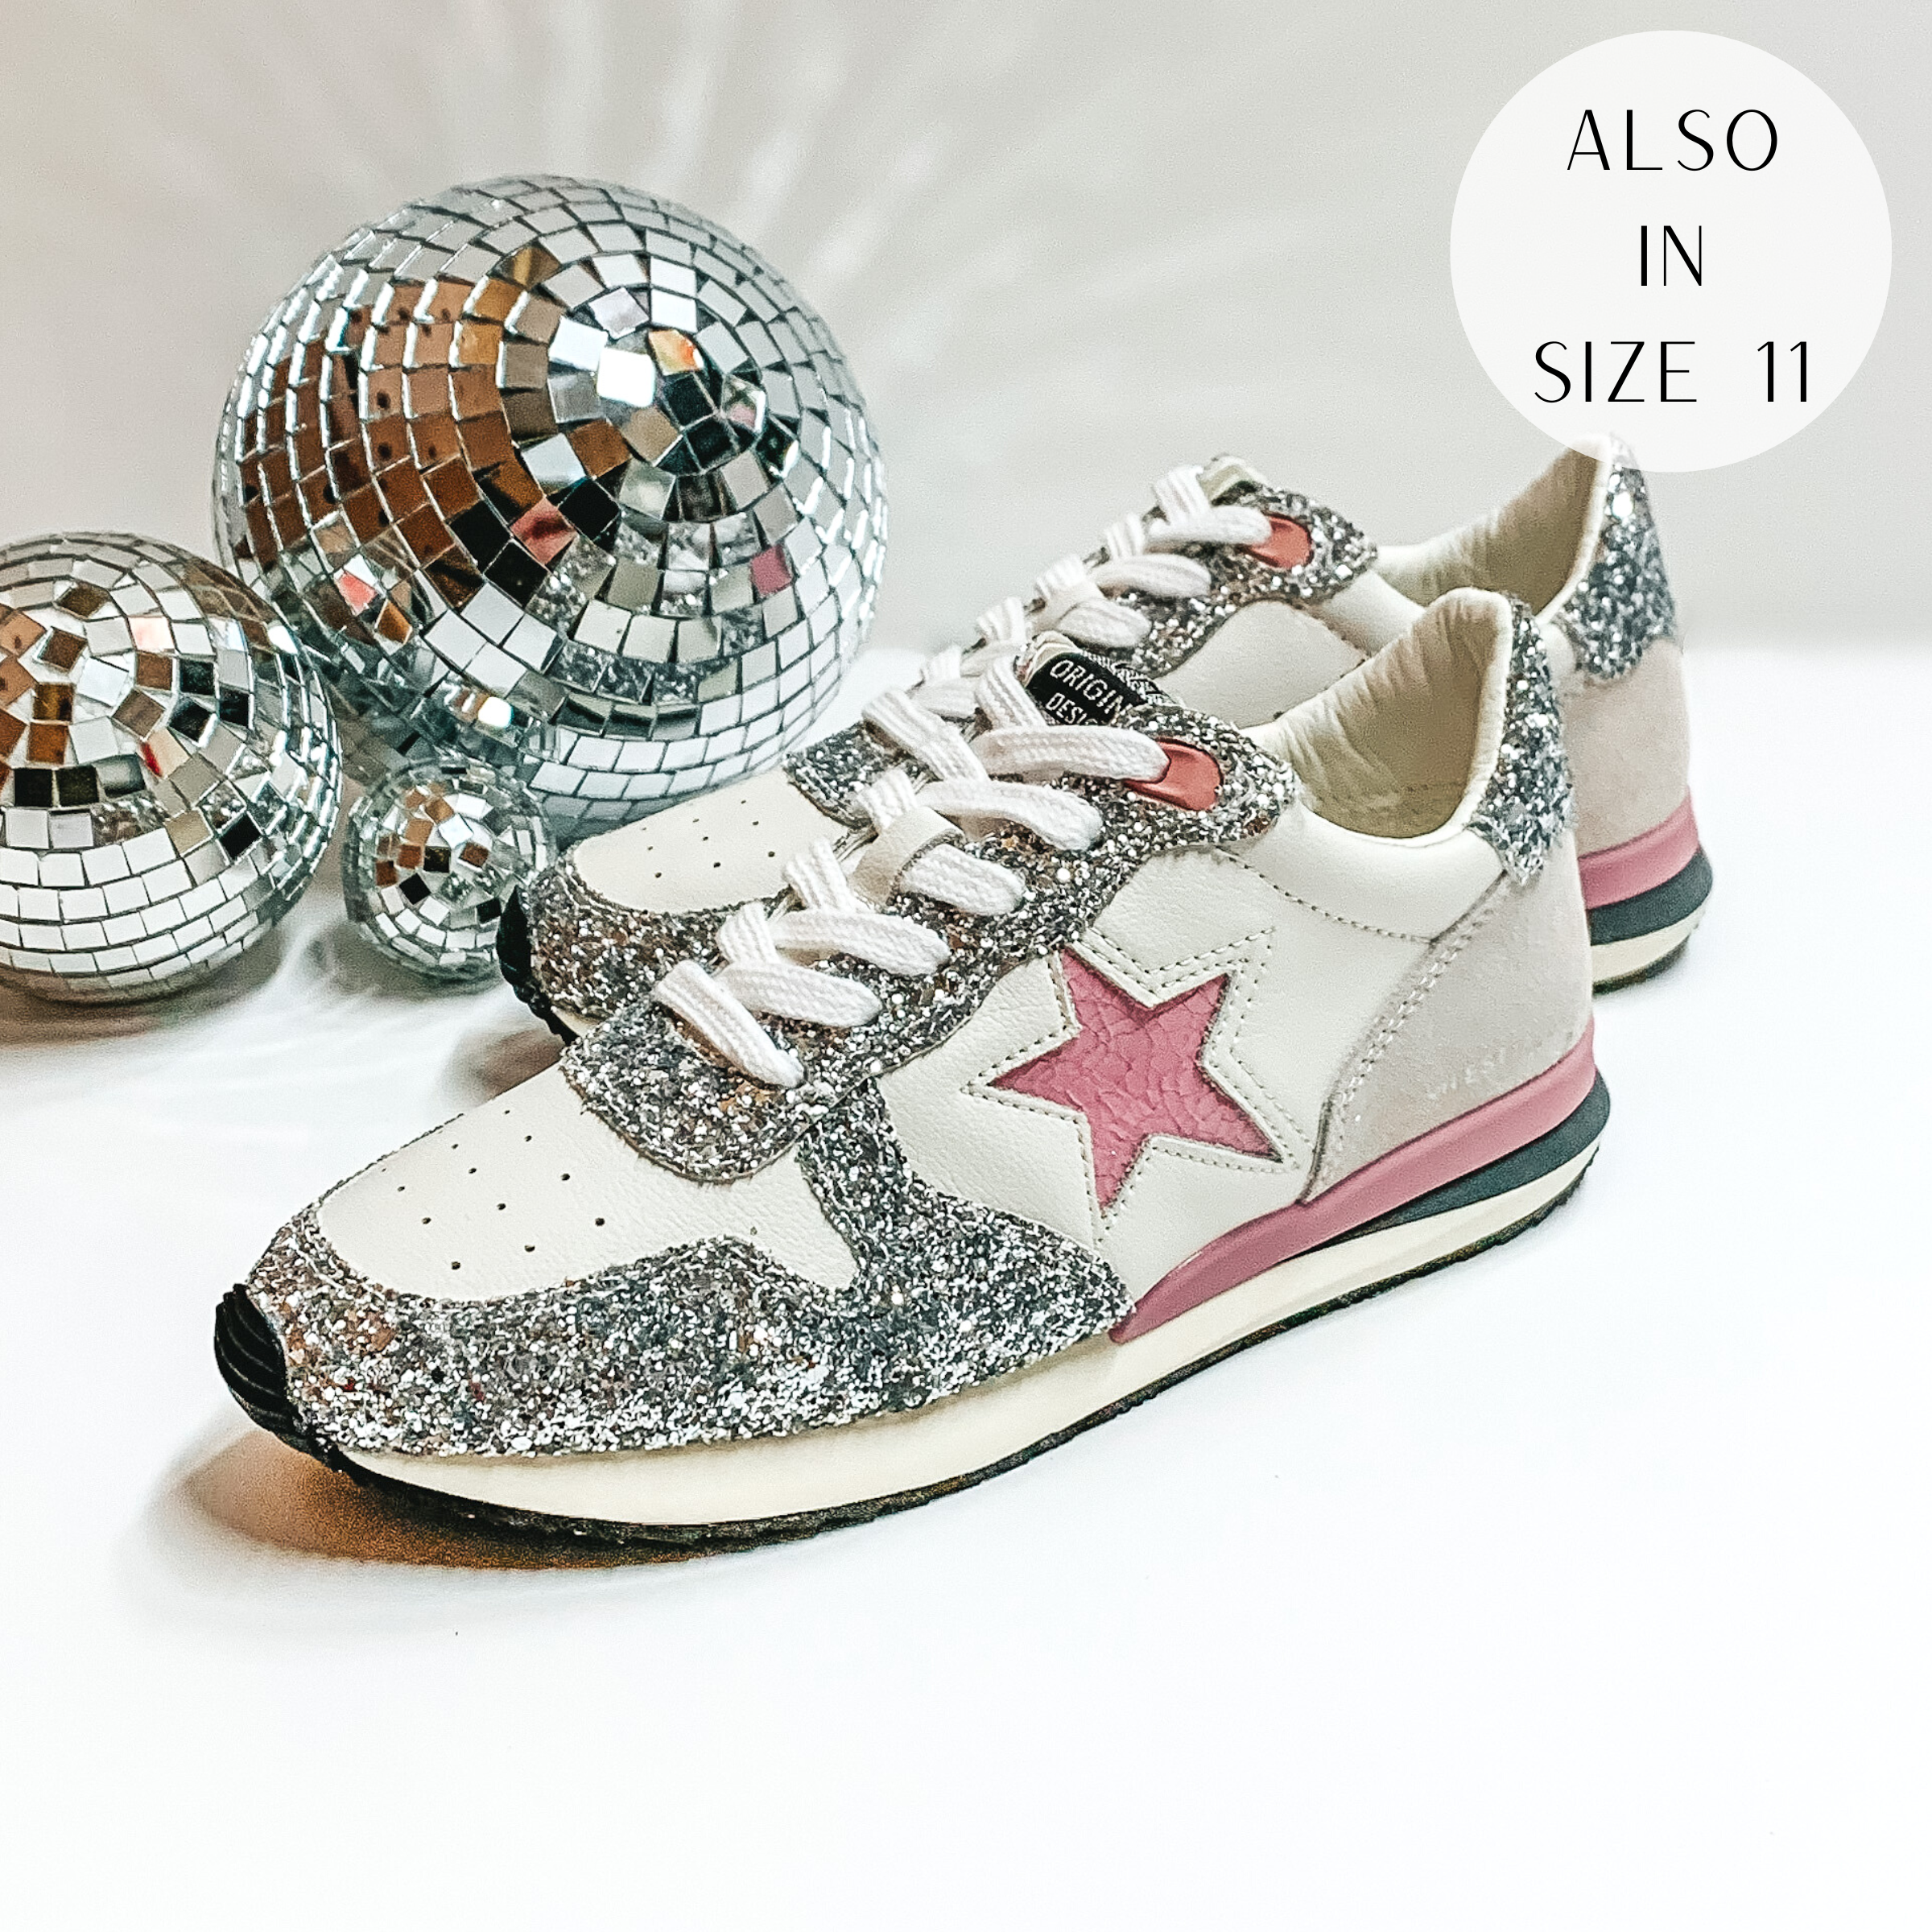 White tennis shoes with silver glitter design over the shoes. These shoes also have a pink star emblem, and a pink and grey part of the sole. These shoes are pictured on a white background with disco balls on the left hand side.